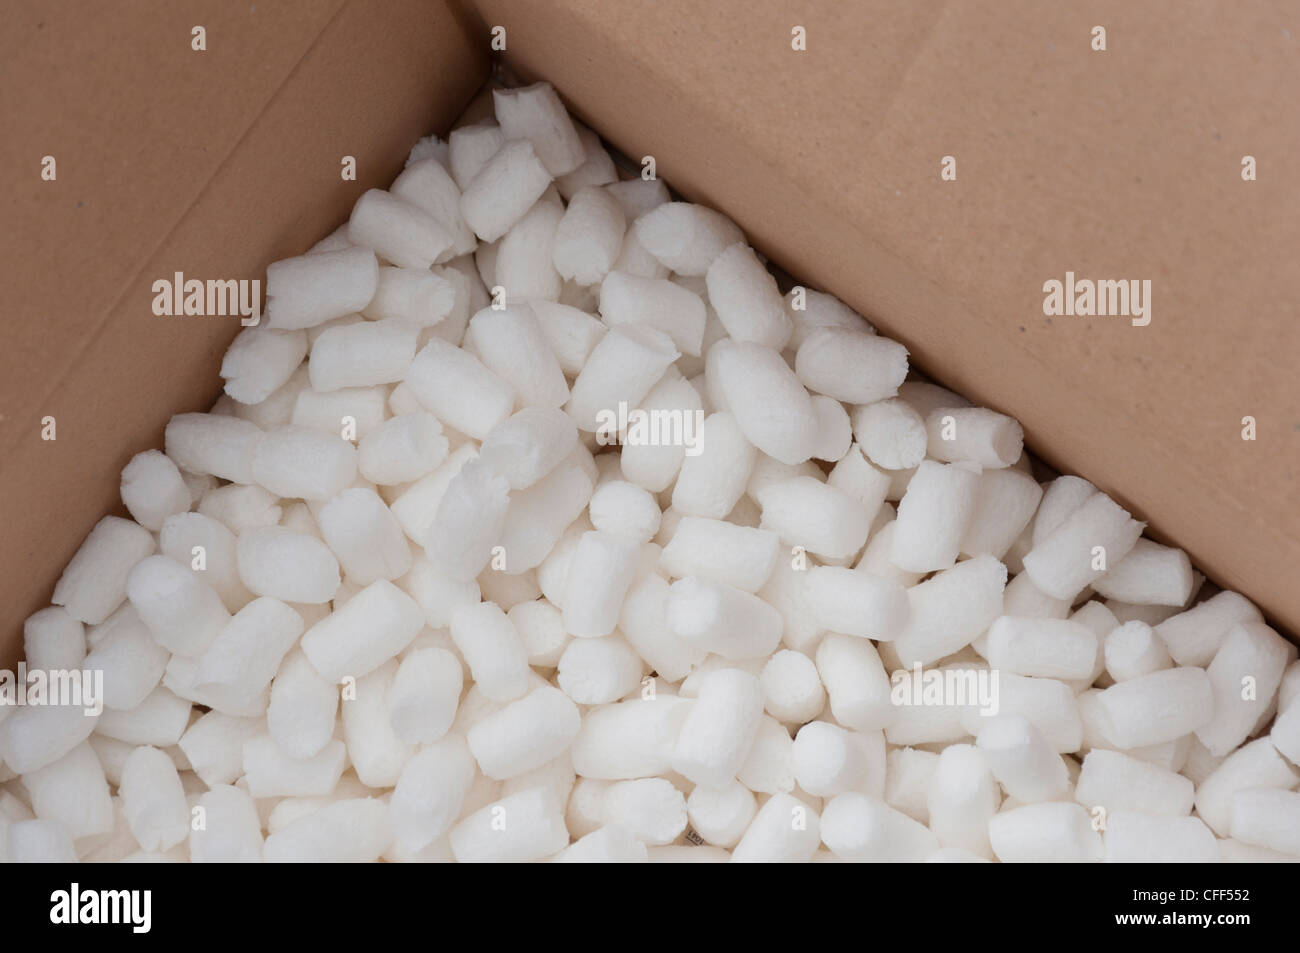 Cardboard carton filled with polystyrene foam chips Stock Photo by  ©willeecole 24136457